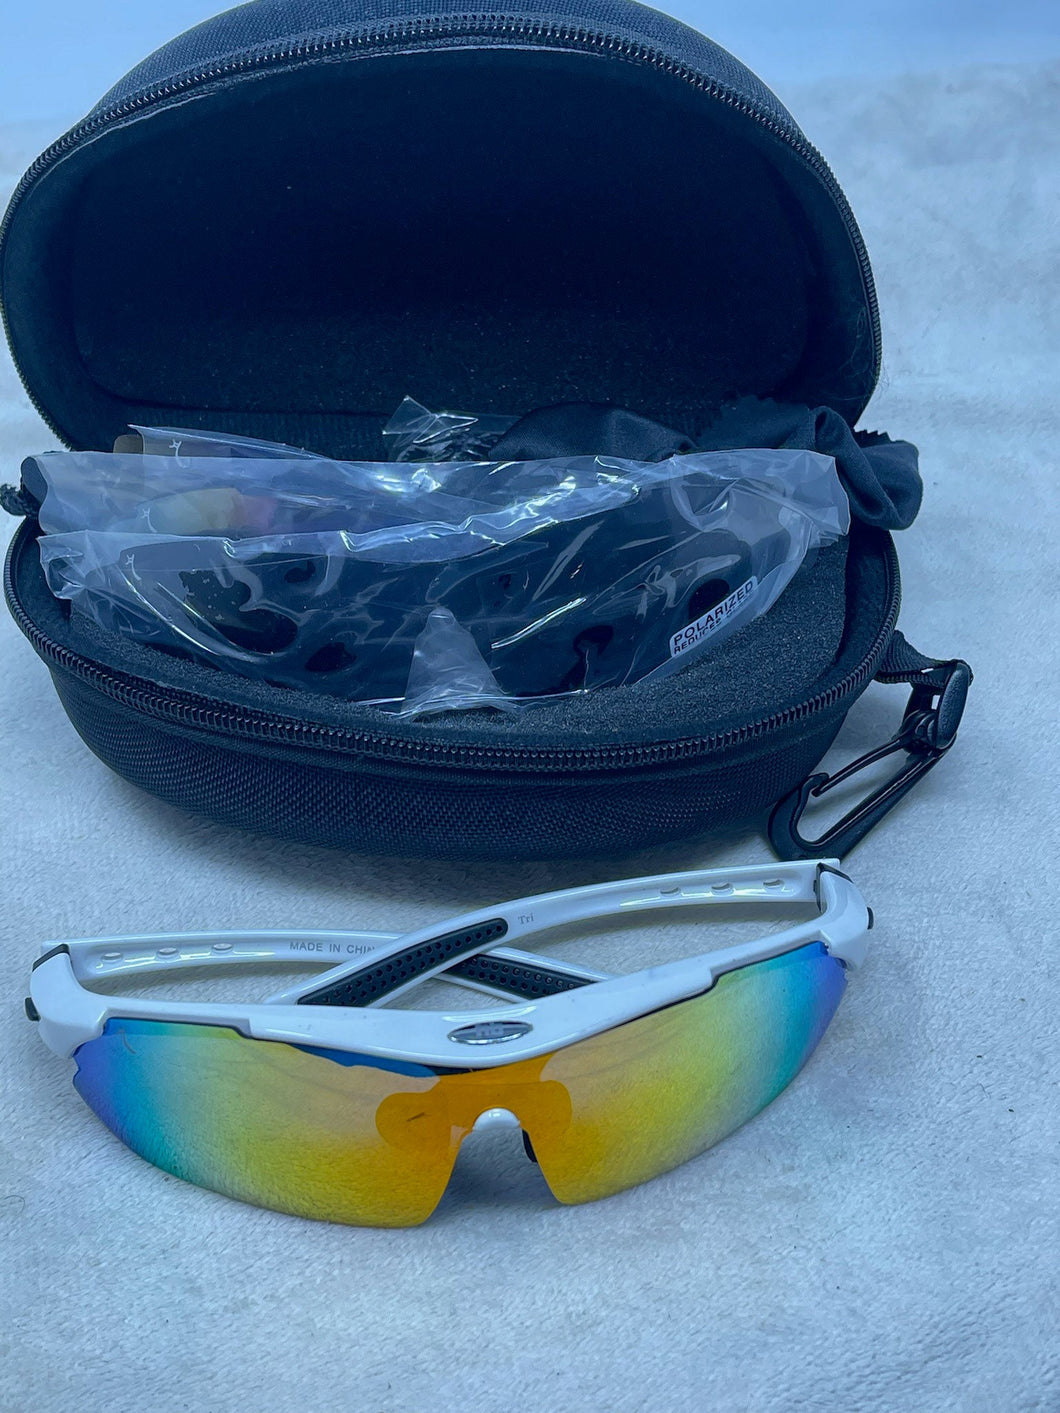 HB Polarizing Outdoor Glasses - 5 Interchangeable Lenses with Case